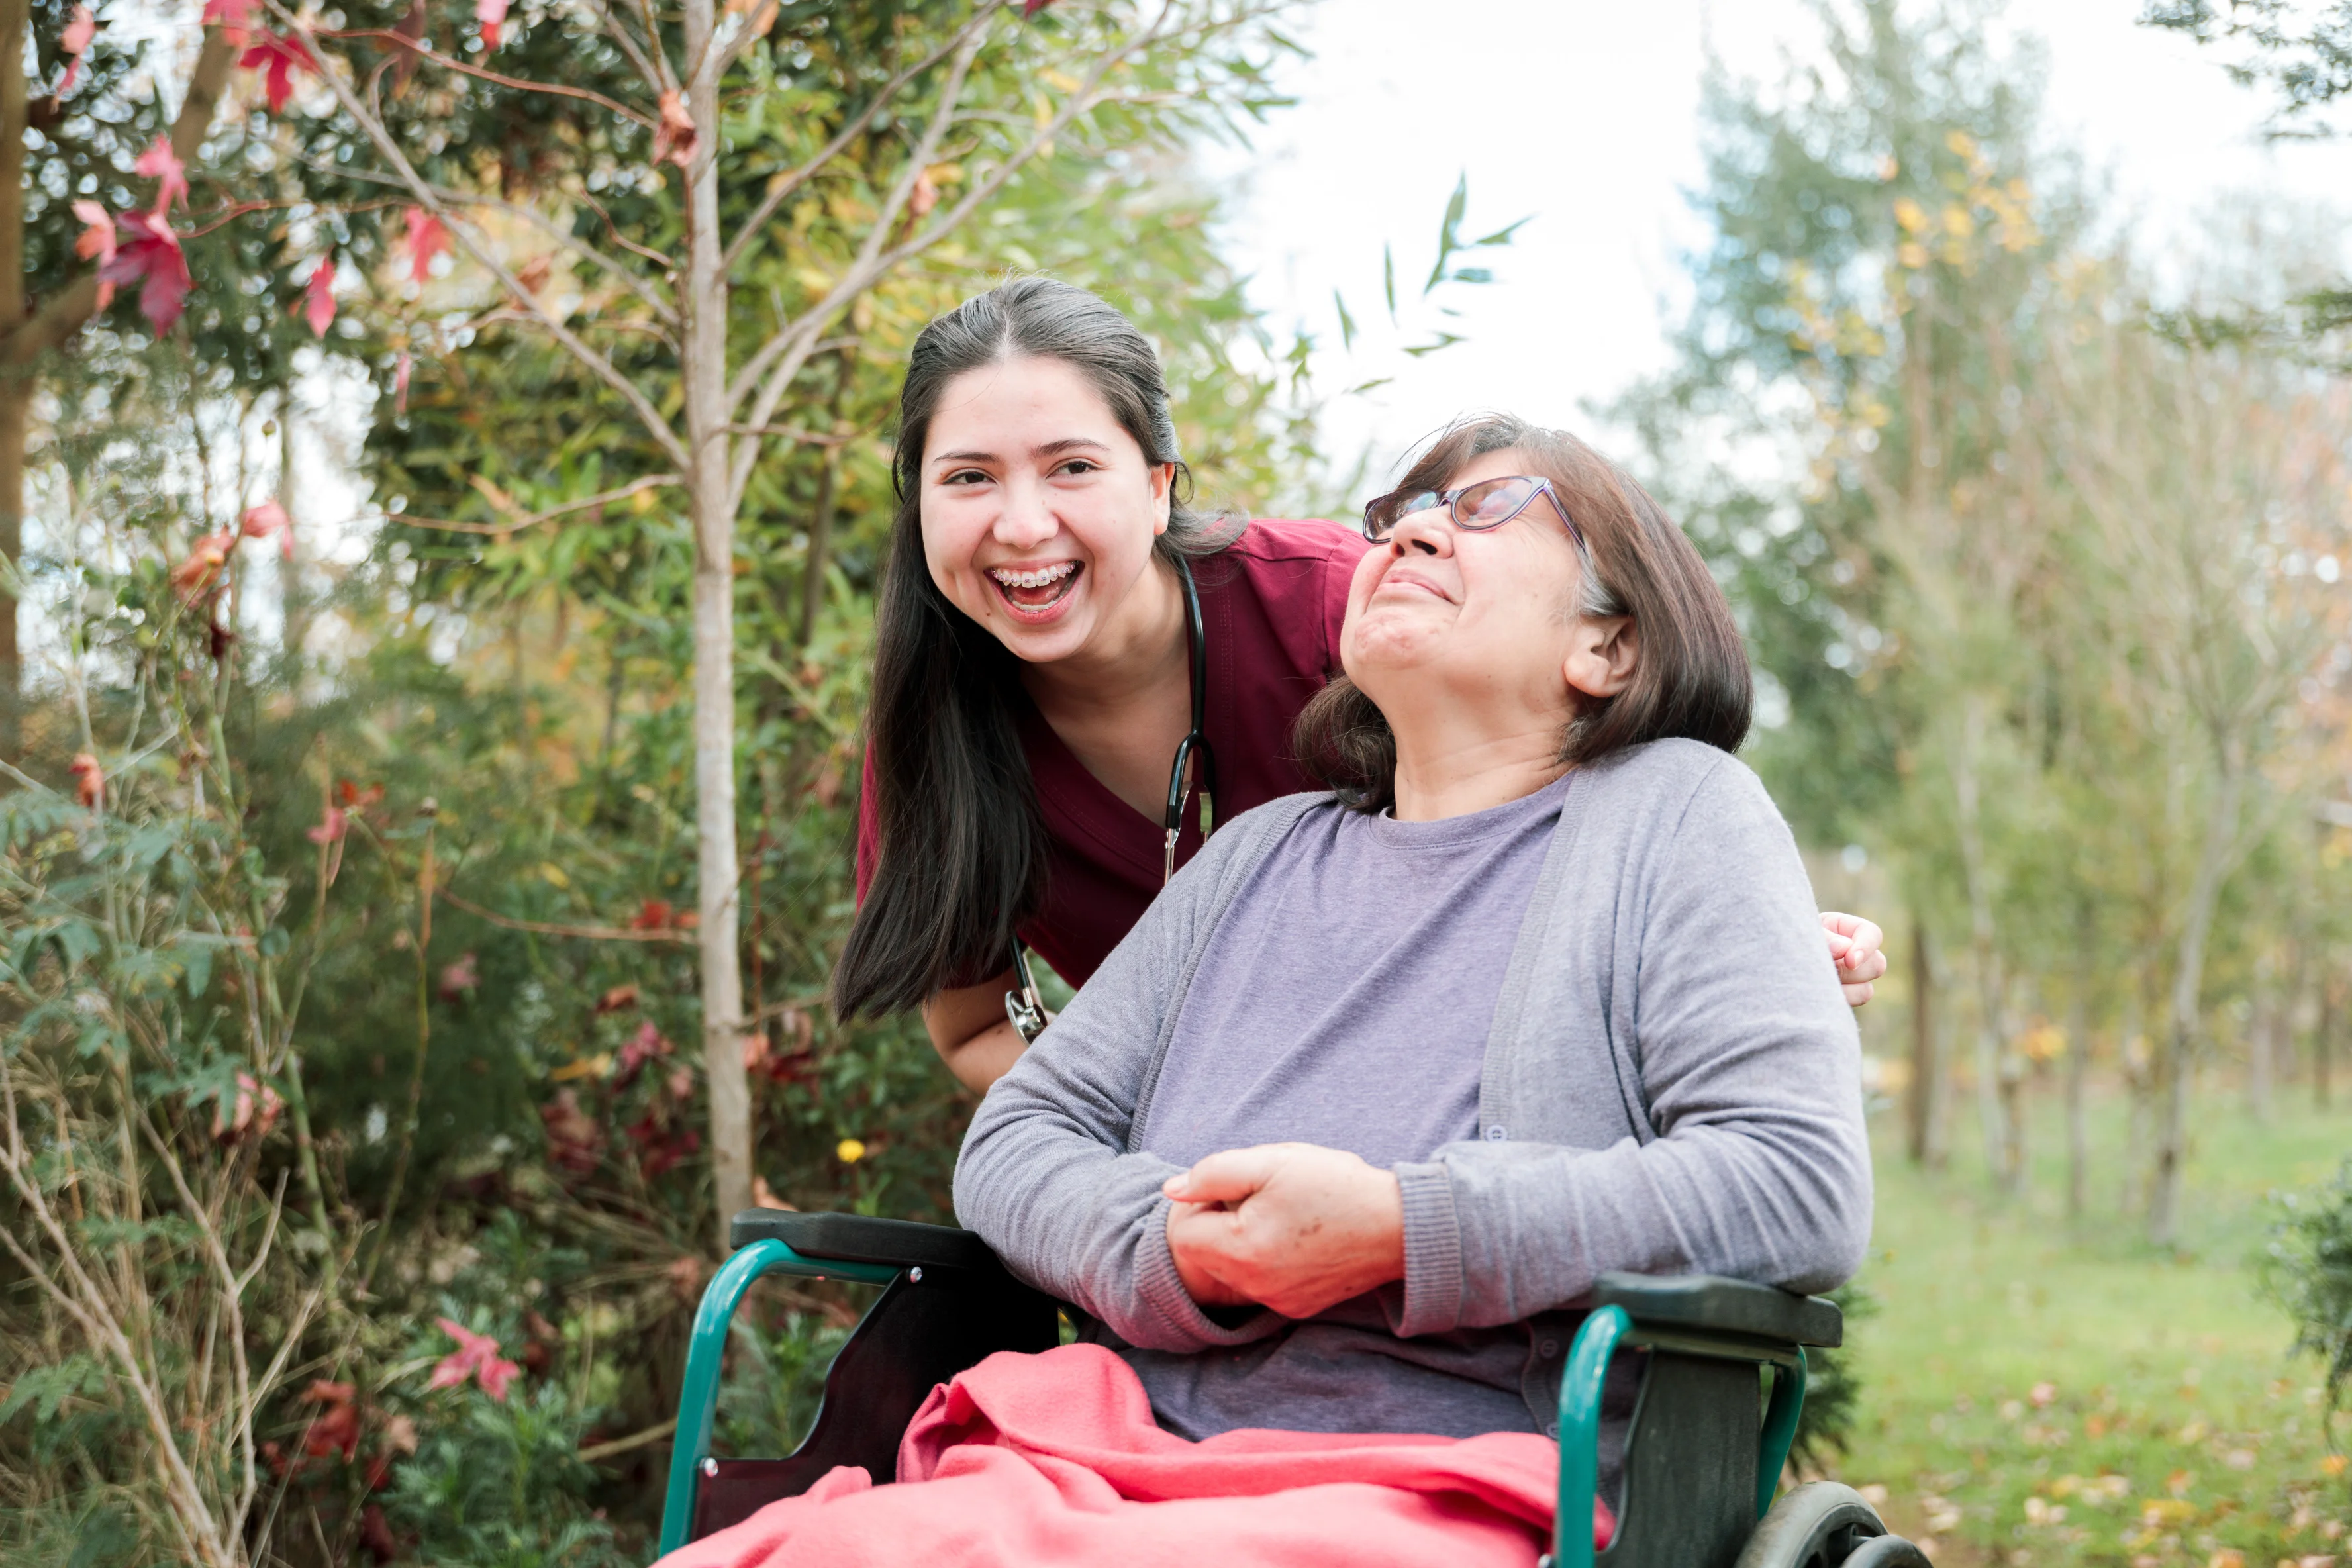 A laughing doctor and a smiling patient taking a walk in a garden